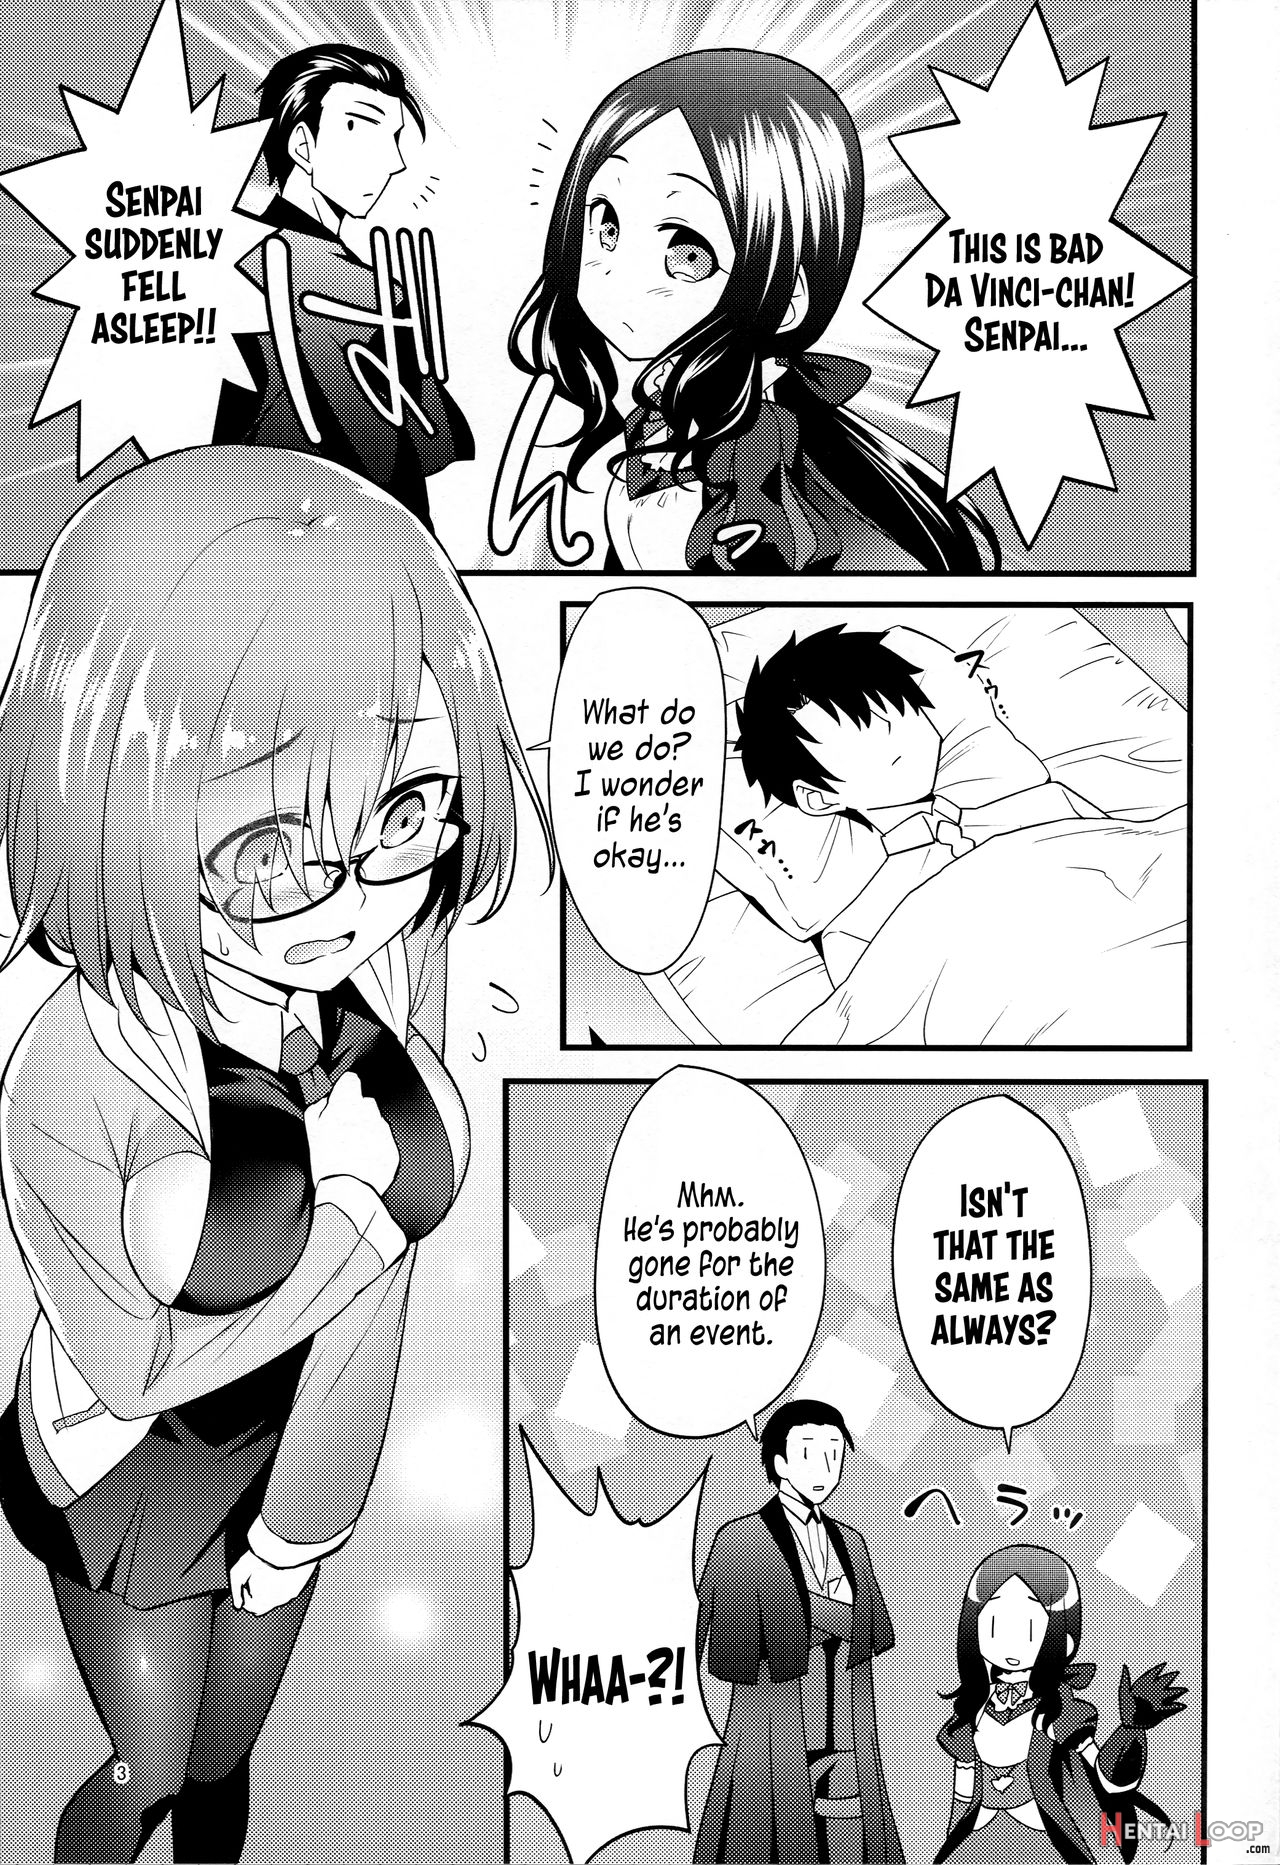 Book About Mashu Molesting Senpai Who Is Sleeping Due To An Event page 2